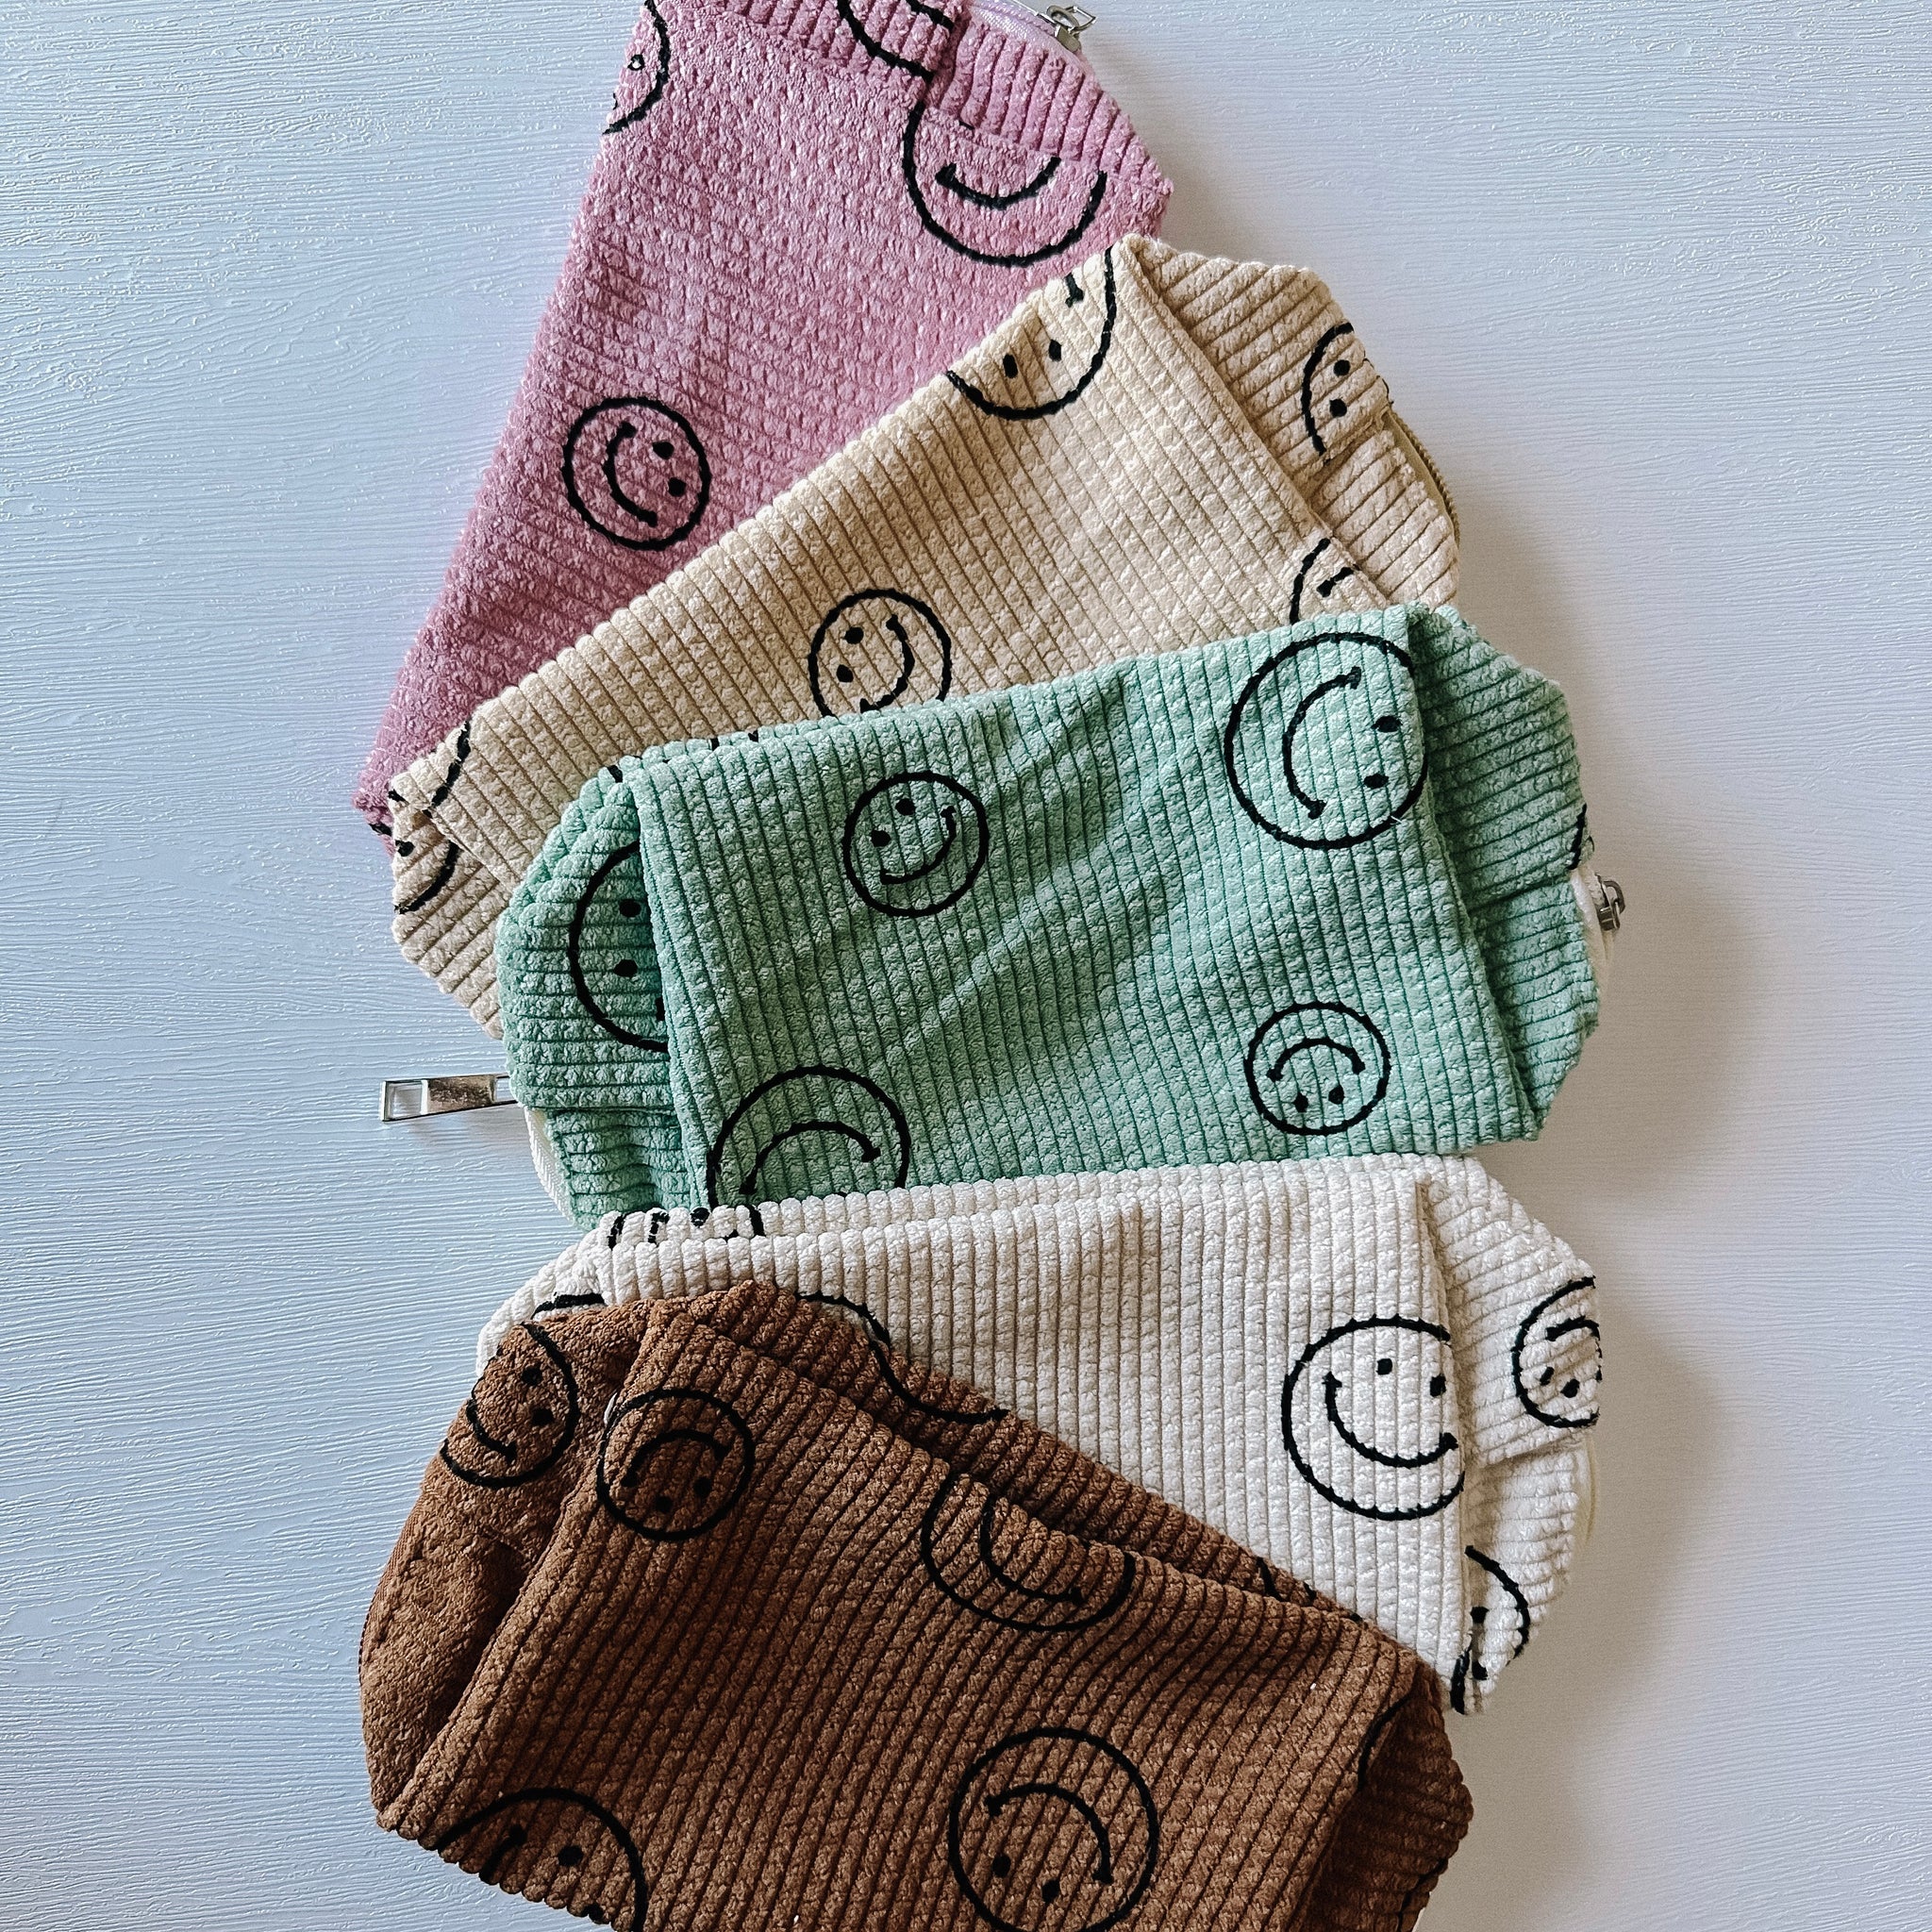 Smiley Pouch Bag